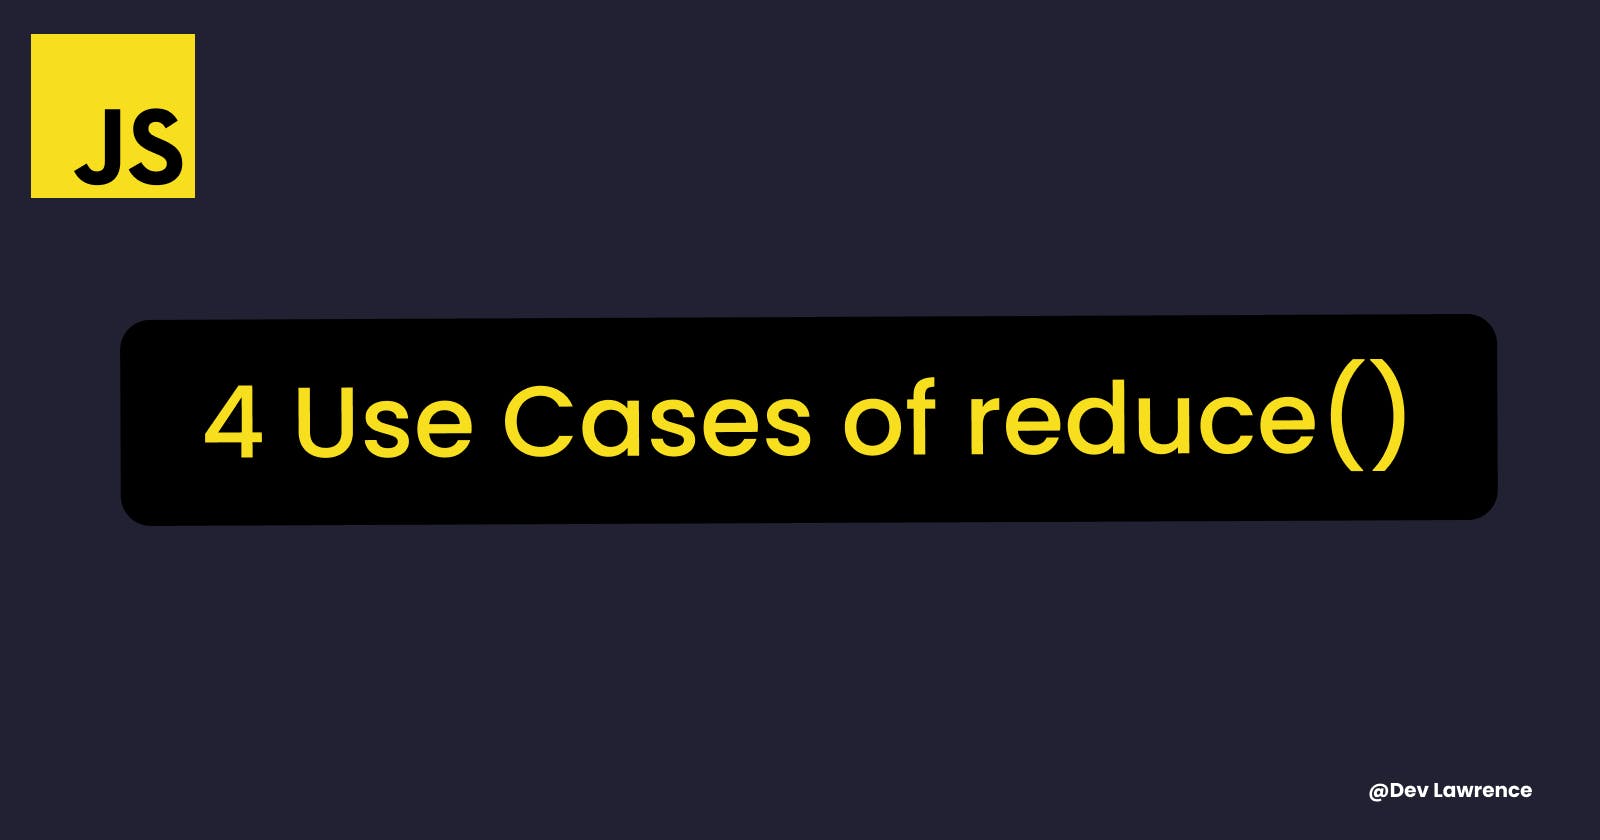 4 Use Cases for reduce() in JavaScript